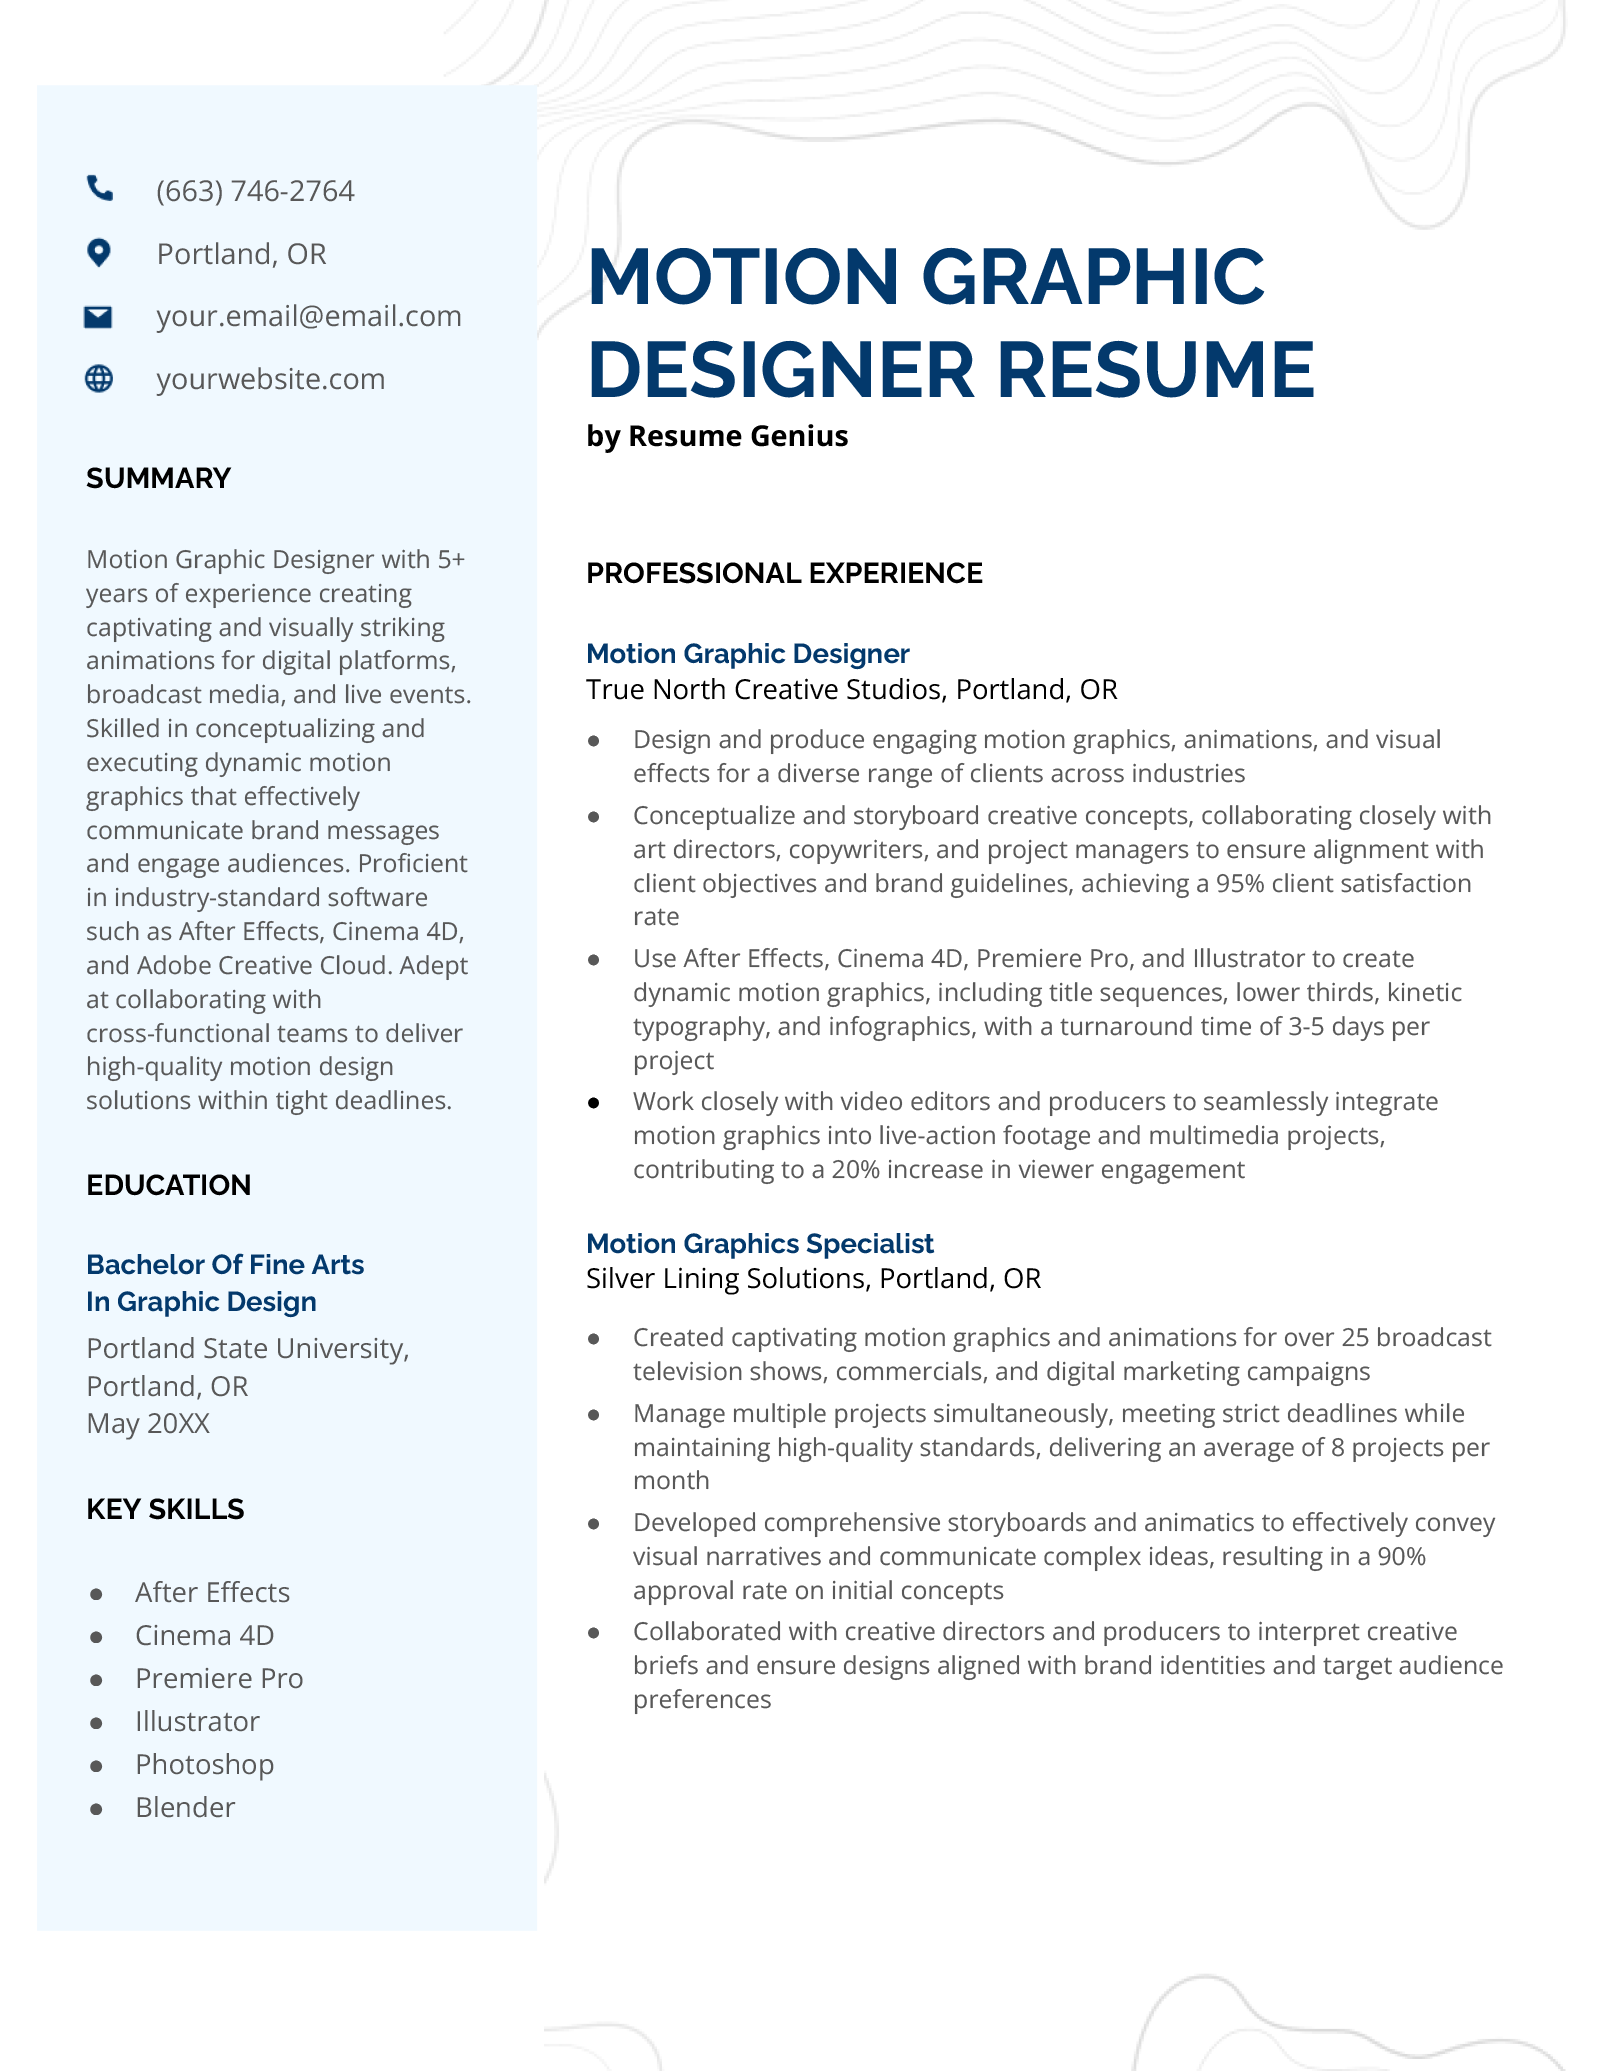 An example resume for a motion graphic designer.